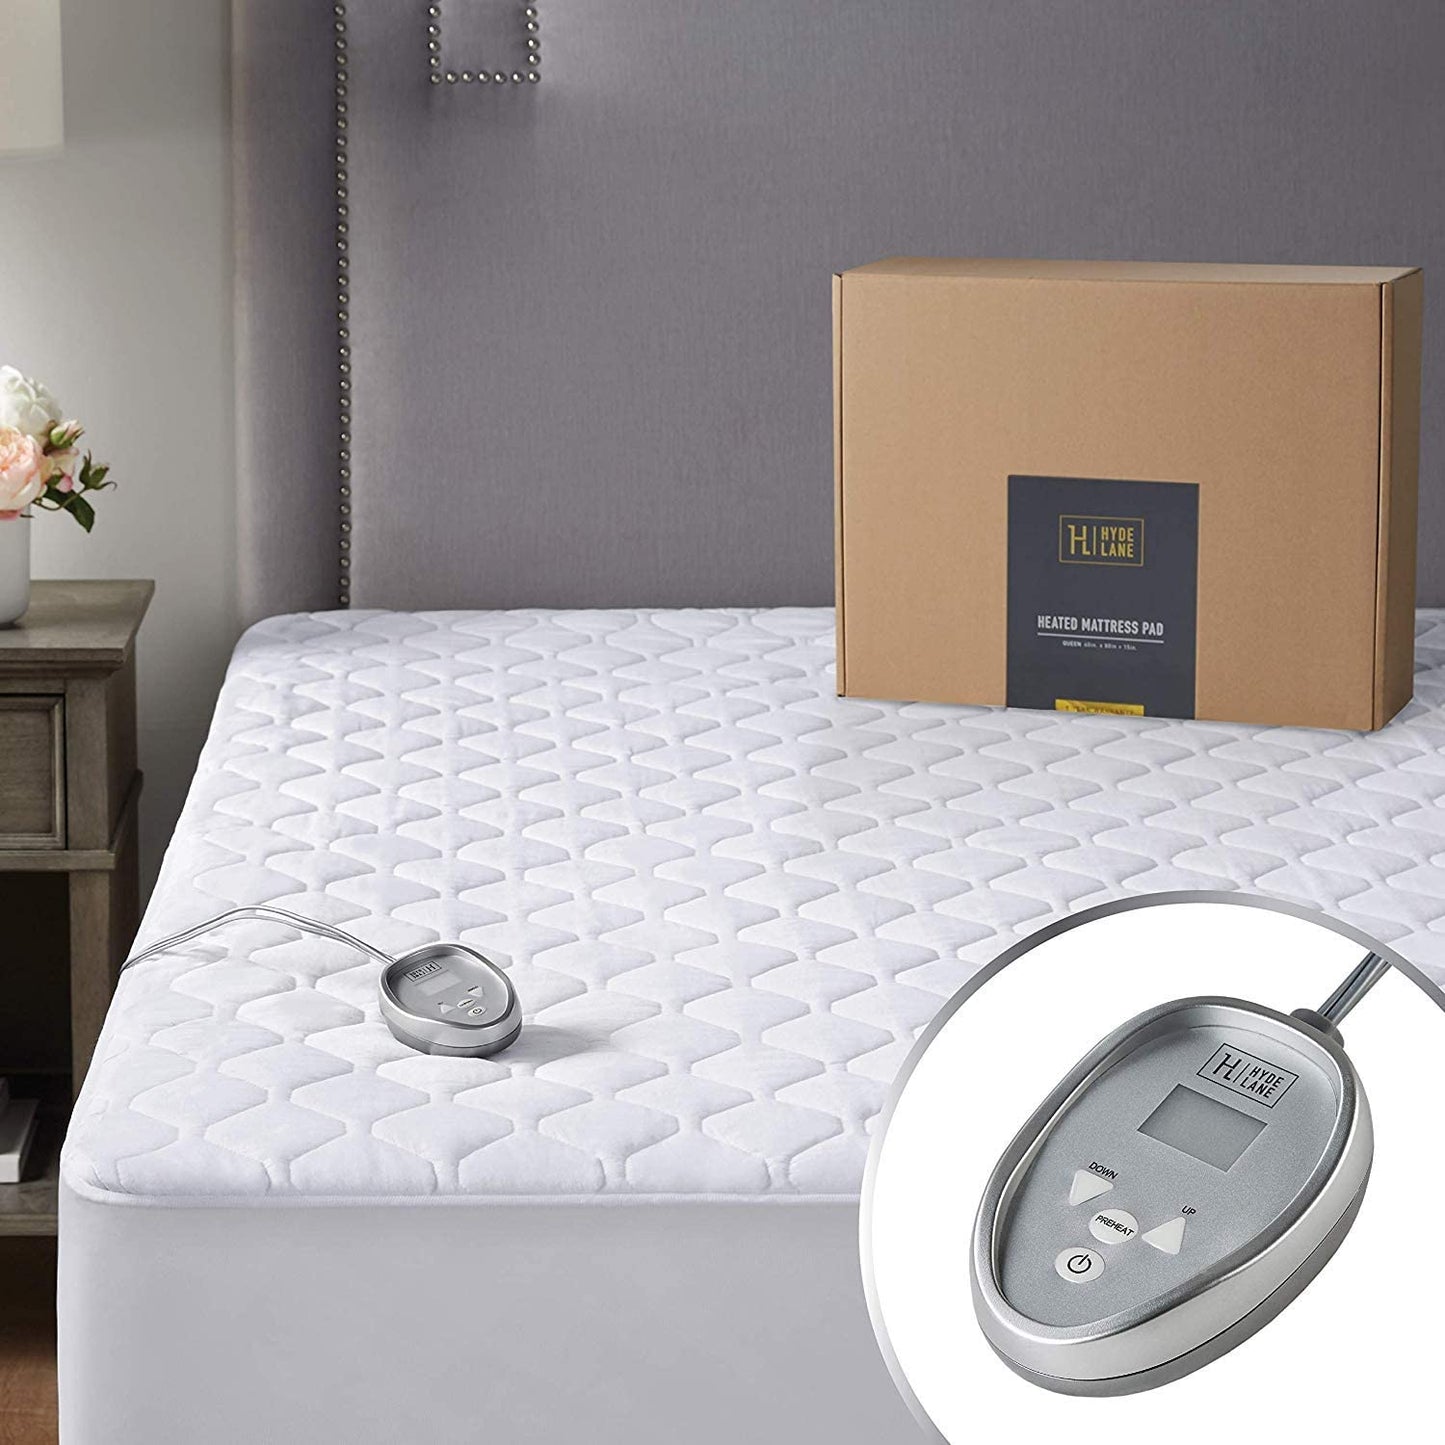 Premium Mattress Heating Pad King Size 78X80 Inch | Quilted Cotton Electrical Mattress Pad with 20 Heat Setting Dual Controller & Auto Shut off | Relieve Sore Muscles/Joints